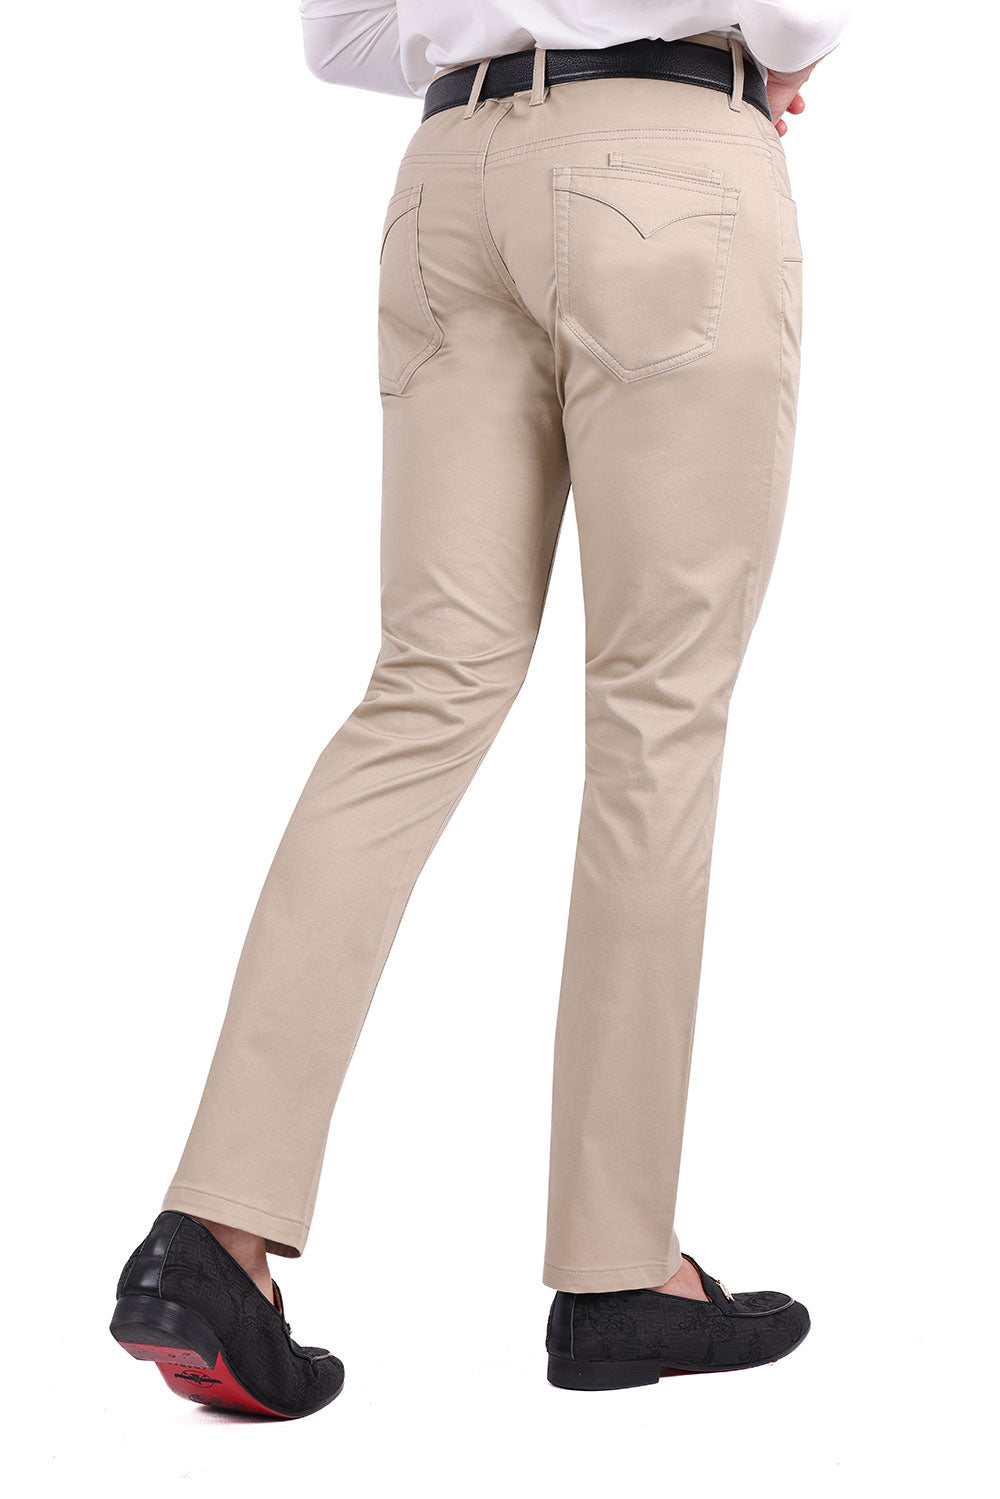 Barabas Men's Solid Color Basic Essential Chino Casual Pants 3CPW31 Tan